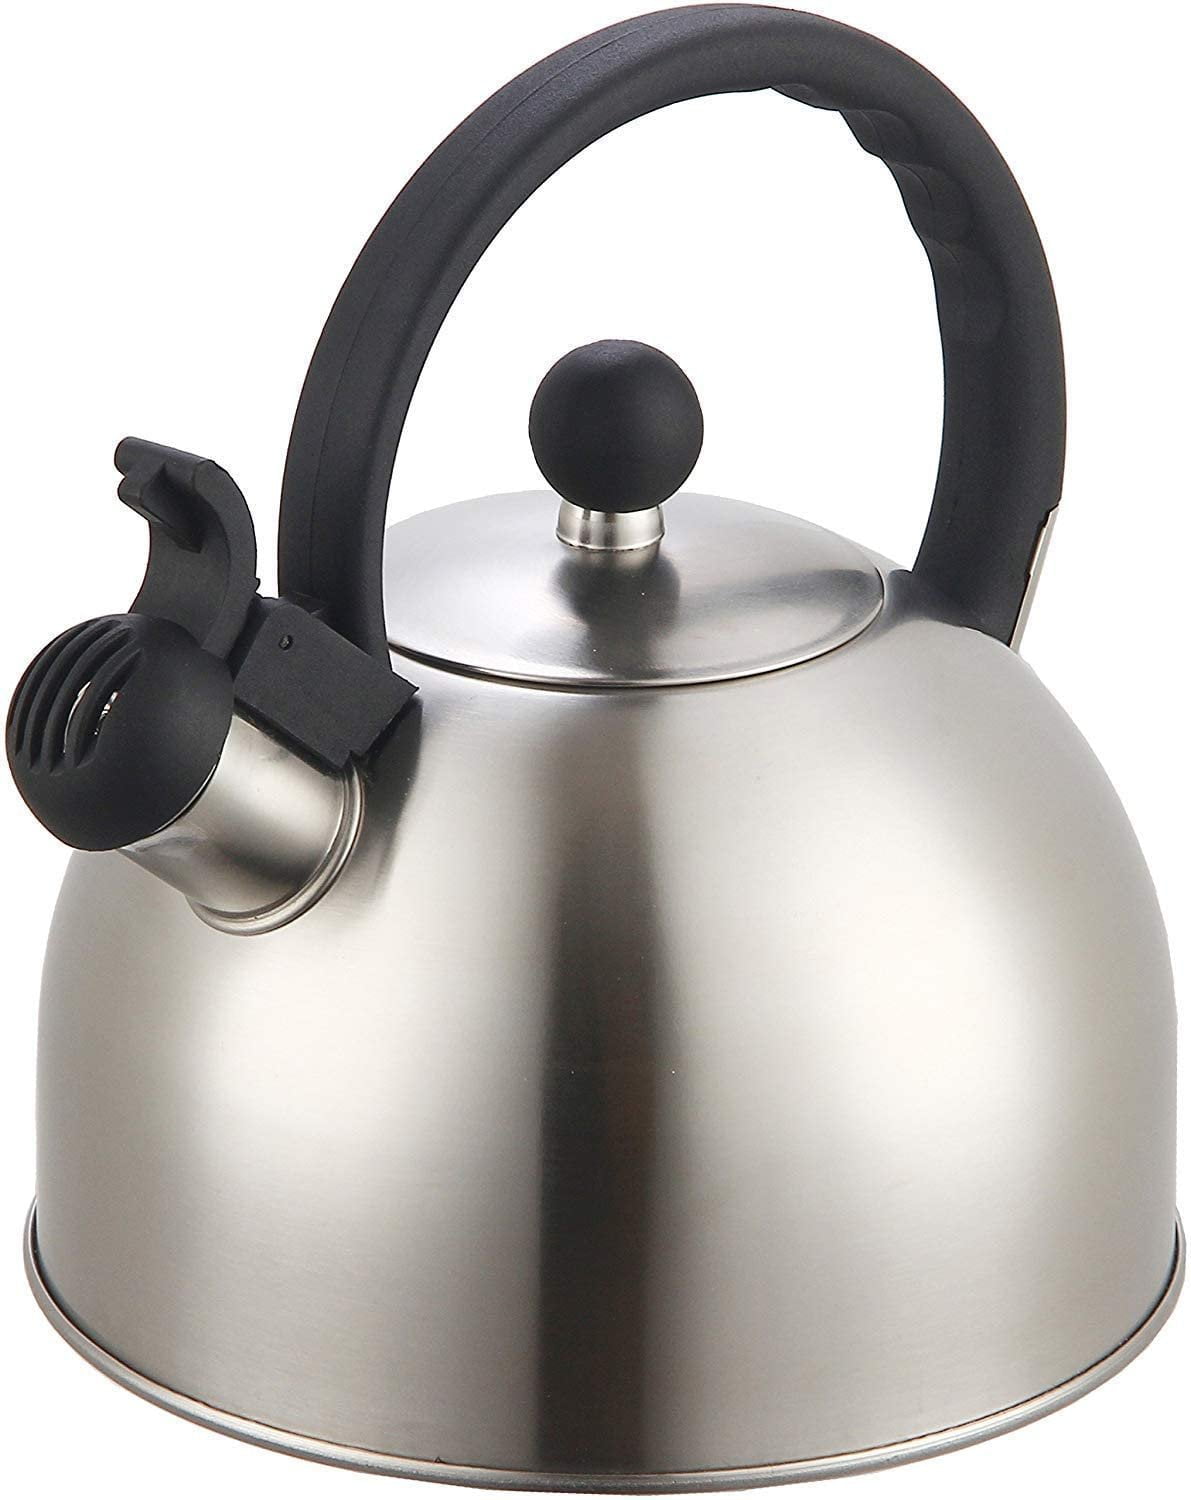 DFL 2 Liter Stainless Steel Whistling Tea Kettle - Modern Stainless Steel  Whistling Tea Pot for Stovetop with Cool Grip Ergonomic Handle (2L Black)